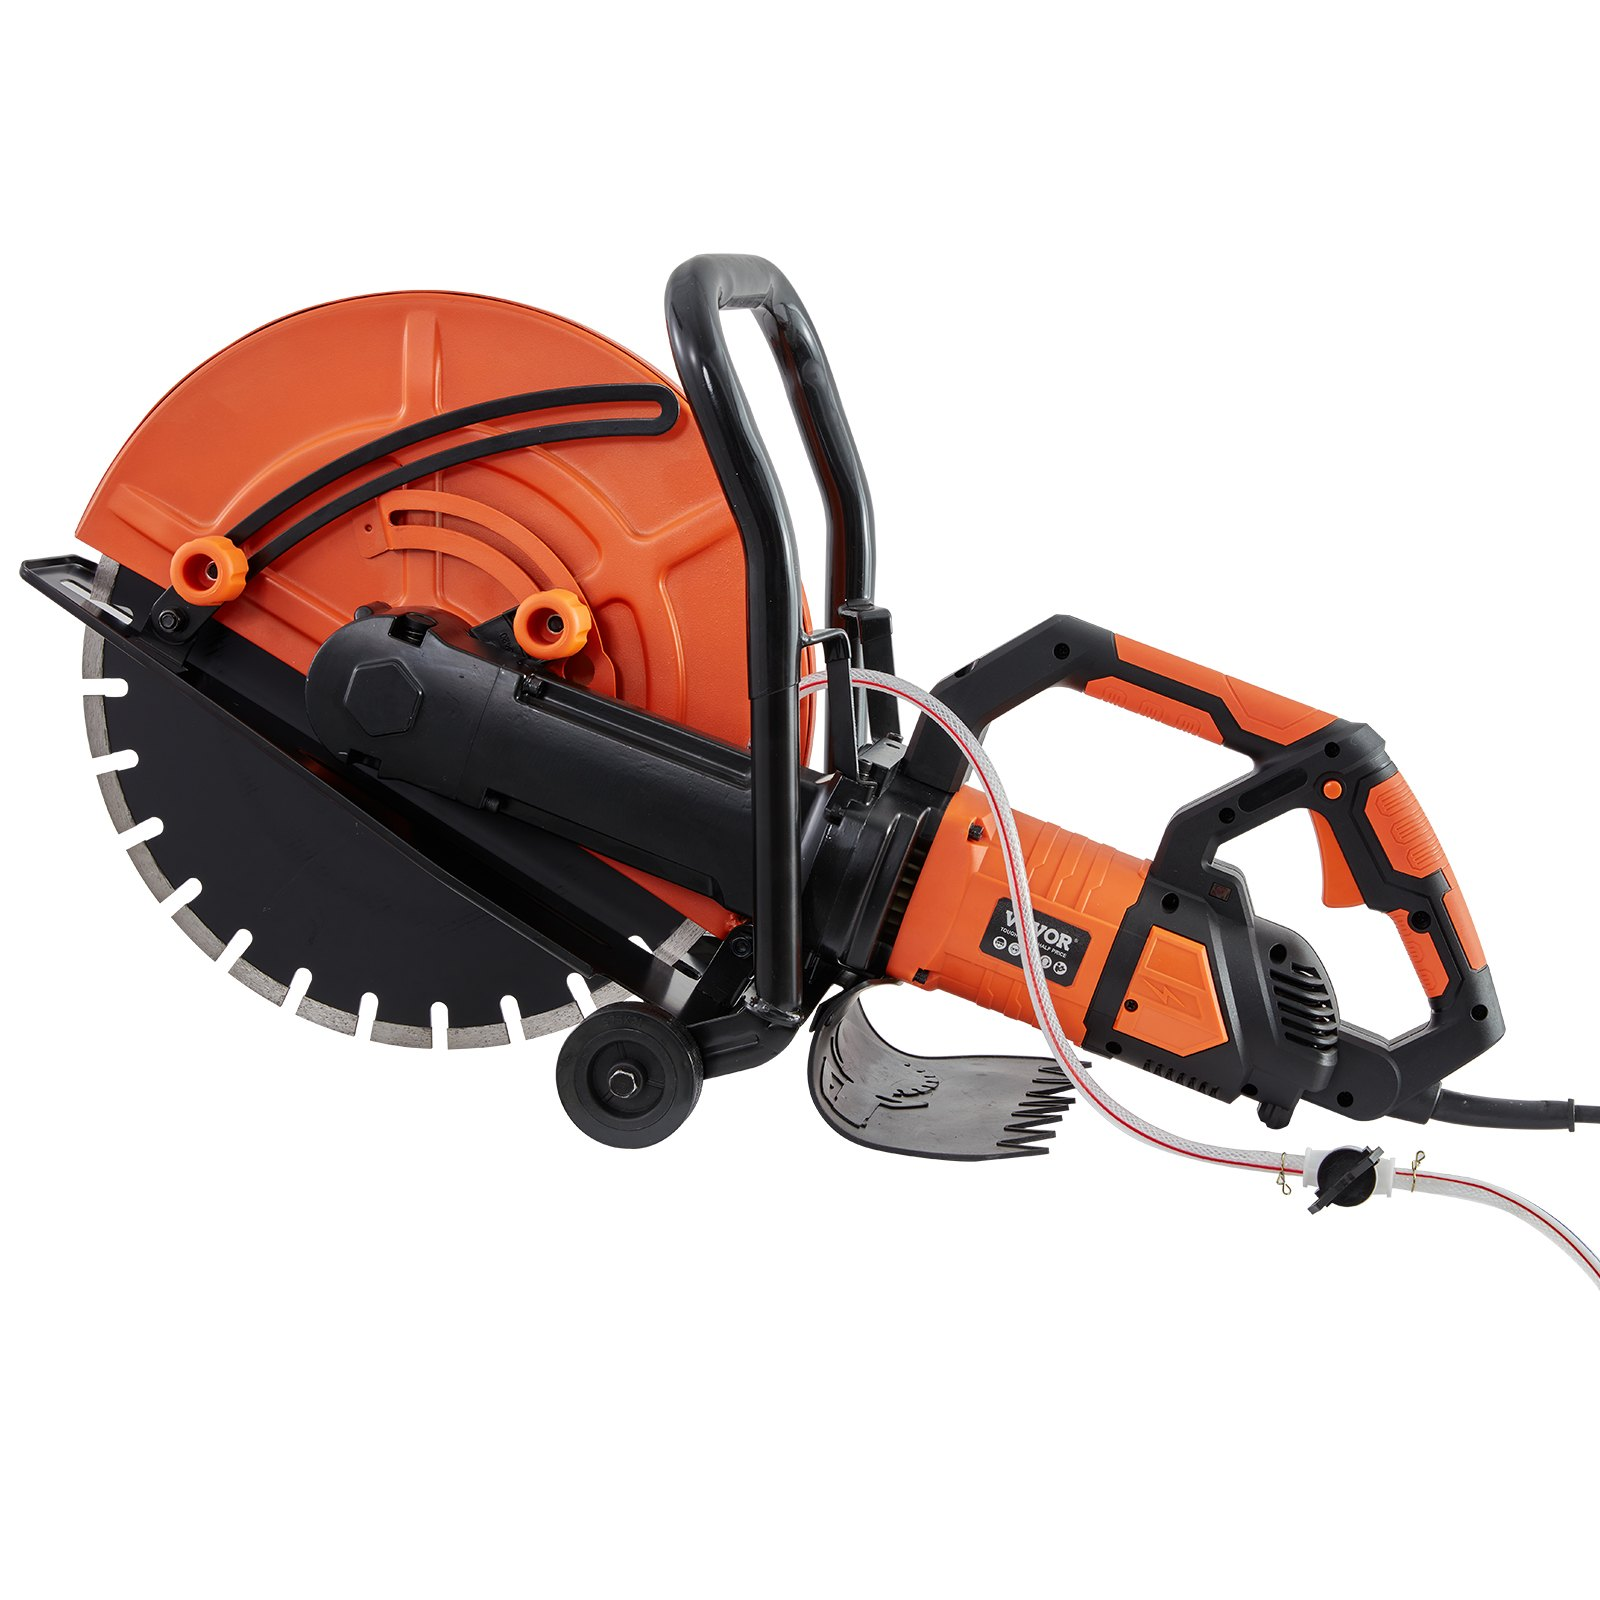 VEVOR Electric Concrete Saw, 16 in, 3200 W 15 A Motor Circular Saw Cutter with Max. 6 in Adjustable Cutting Depth, Wet Disk Saw Cutter Includes Water Line, Pump and Blade, for Stone, Brick, Goodies N Stuff